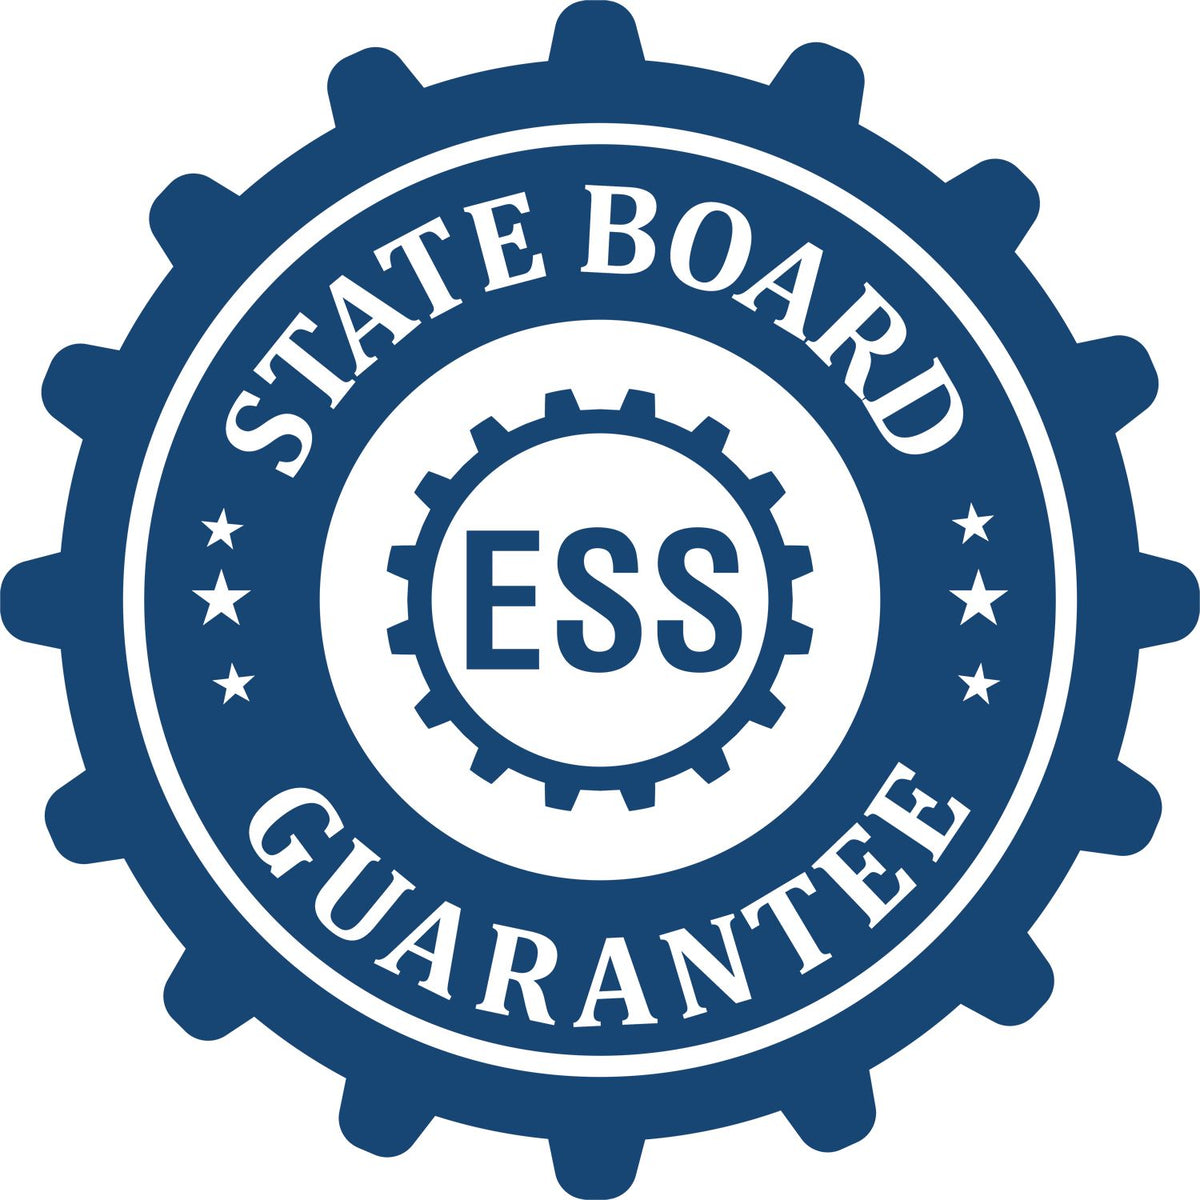 An emblem in a gear shape illustrating a state board guarantee for the State of Alaska Extended Long Reach Geologist Seal